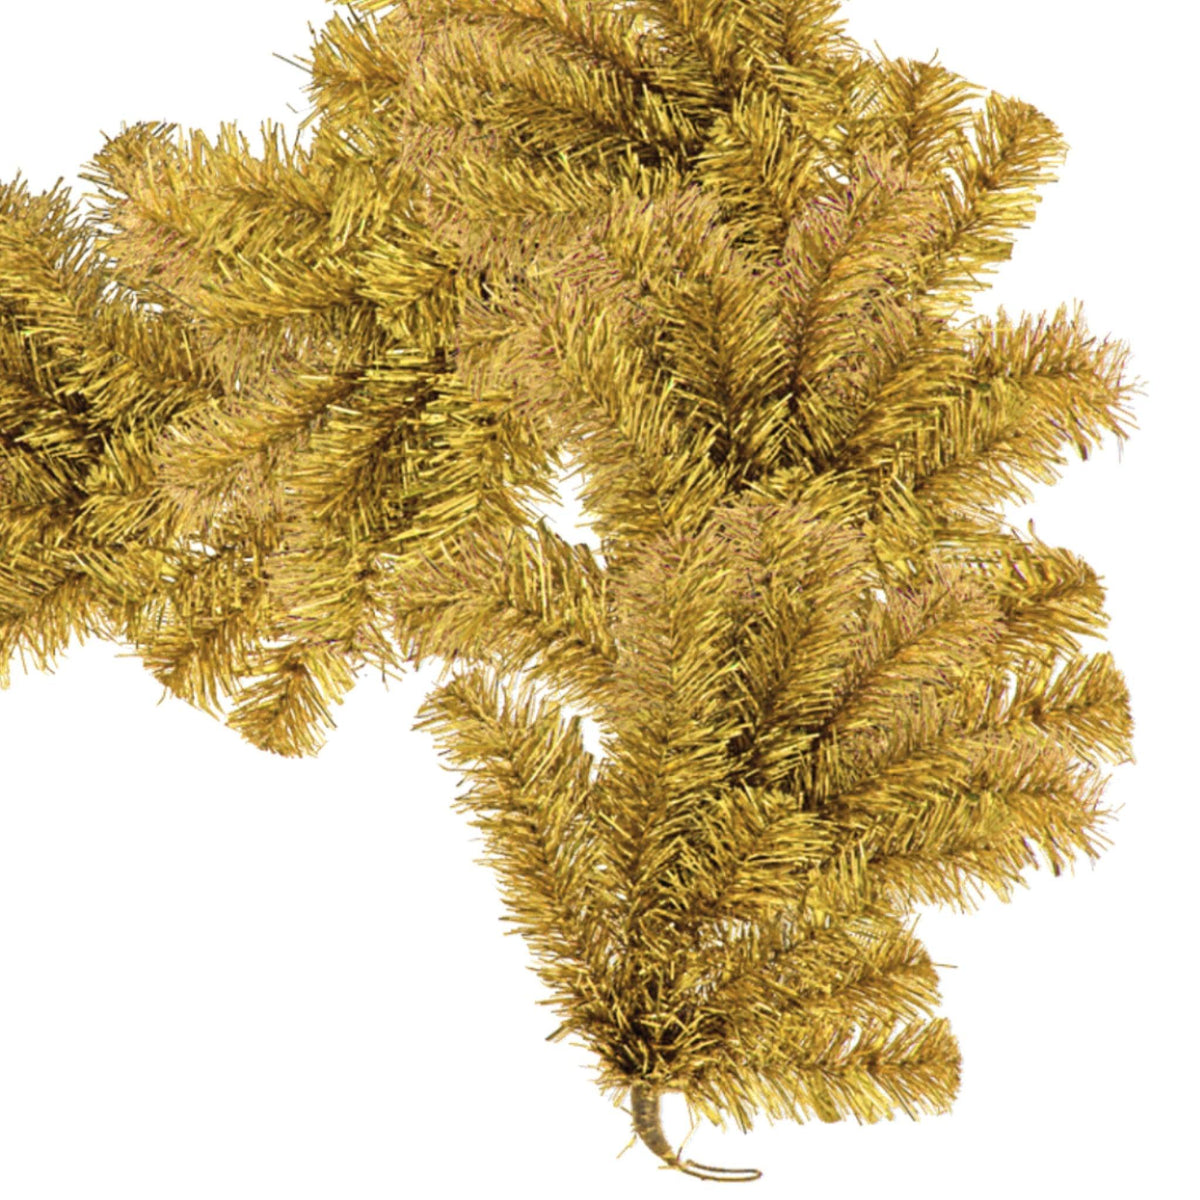 Shop for Lee Display's brand new 6FT Shiny Gold Tinsel Brush Garlands on sale at leedisplay.com.  End section with wire